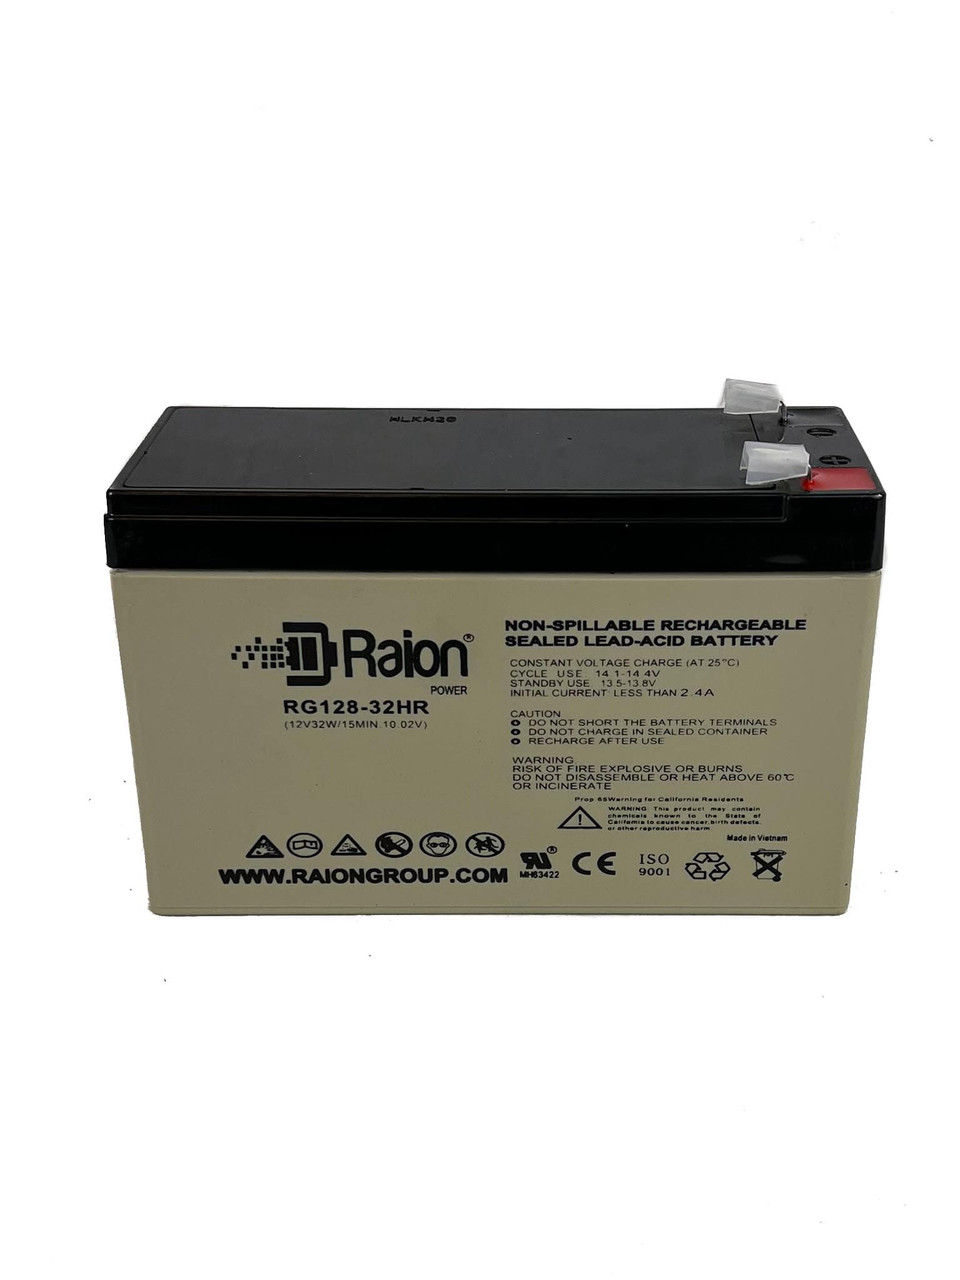 Raion Power RG128-32HR Replacement High Rate Battery Cartridge for Powerware PW3110-700i